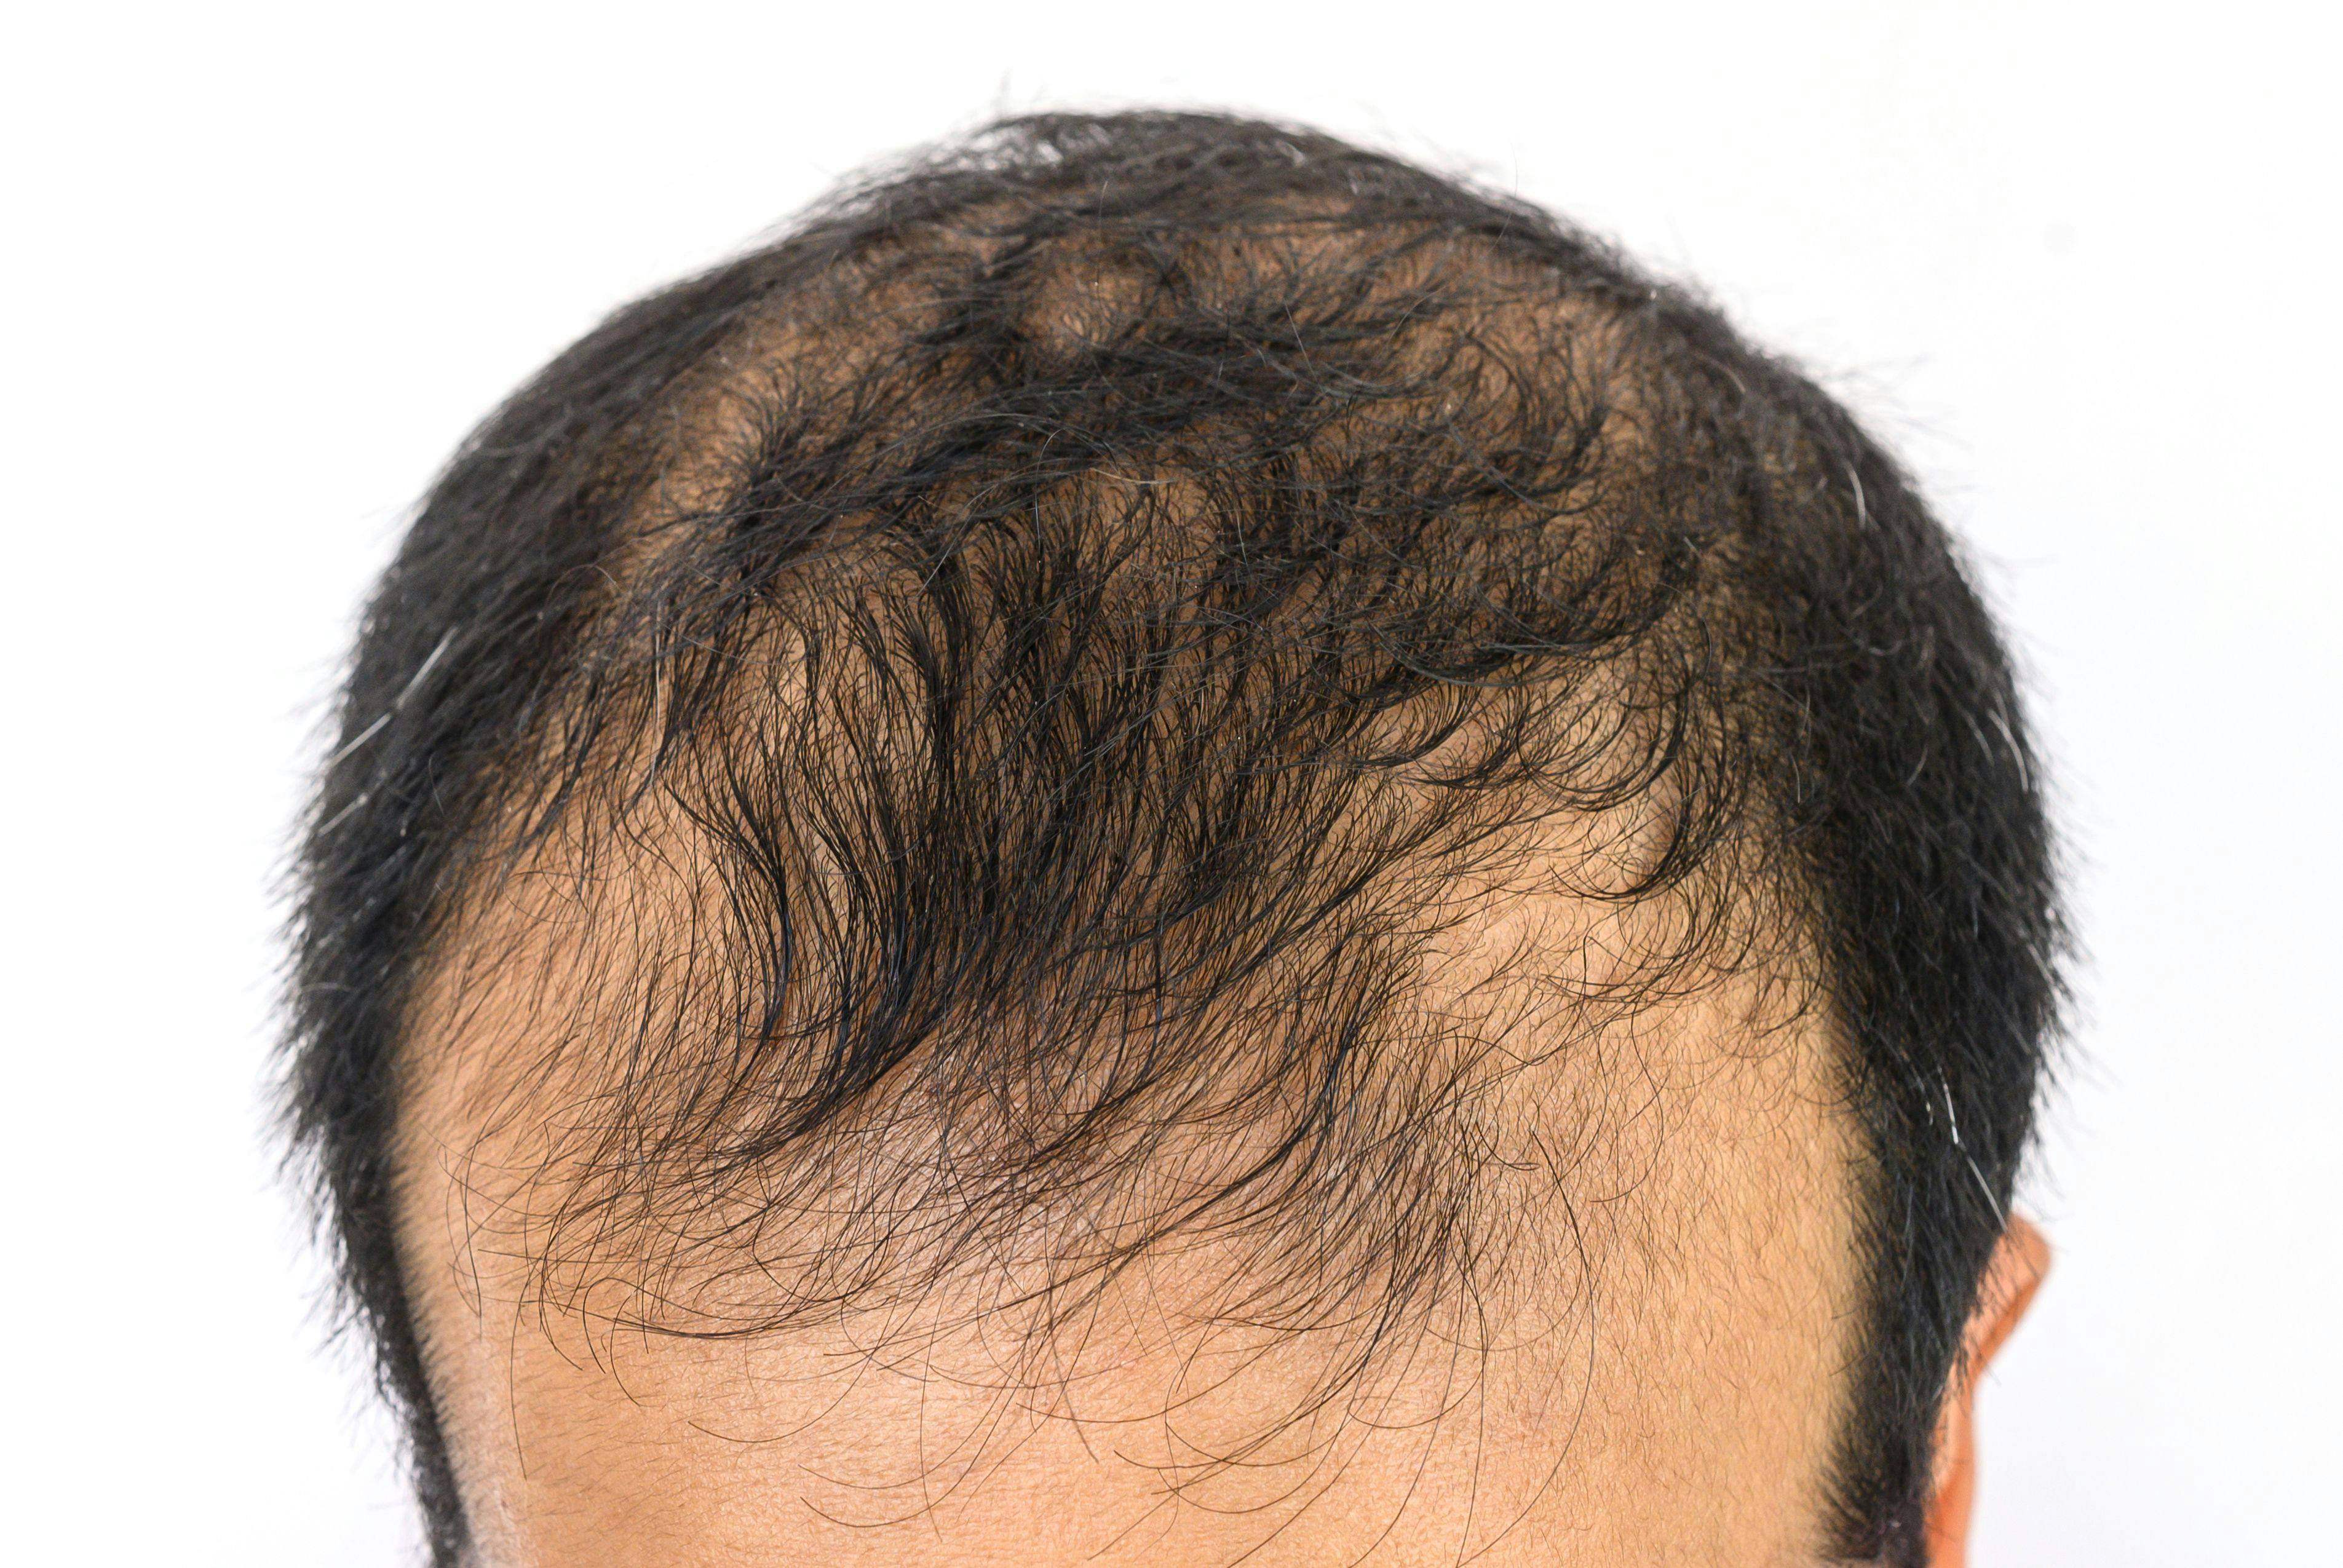 Dermoscopy Assessment Showed Efficacy of Botulinum Toxin A in Egyptian Patients With Androgenetic Alopecia